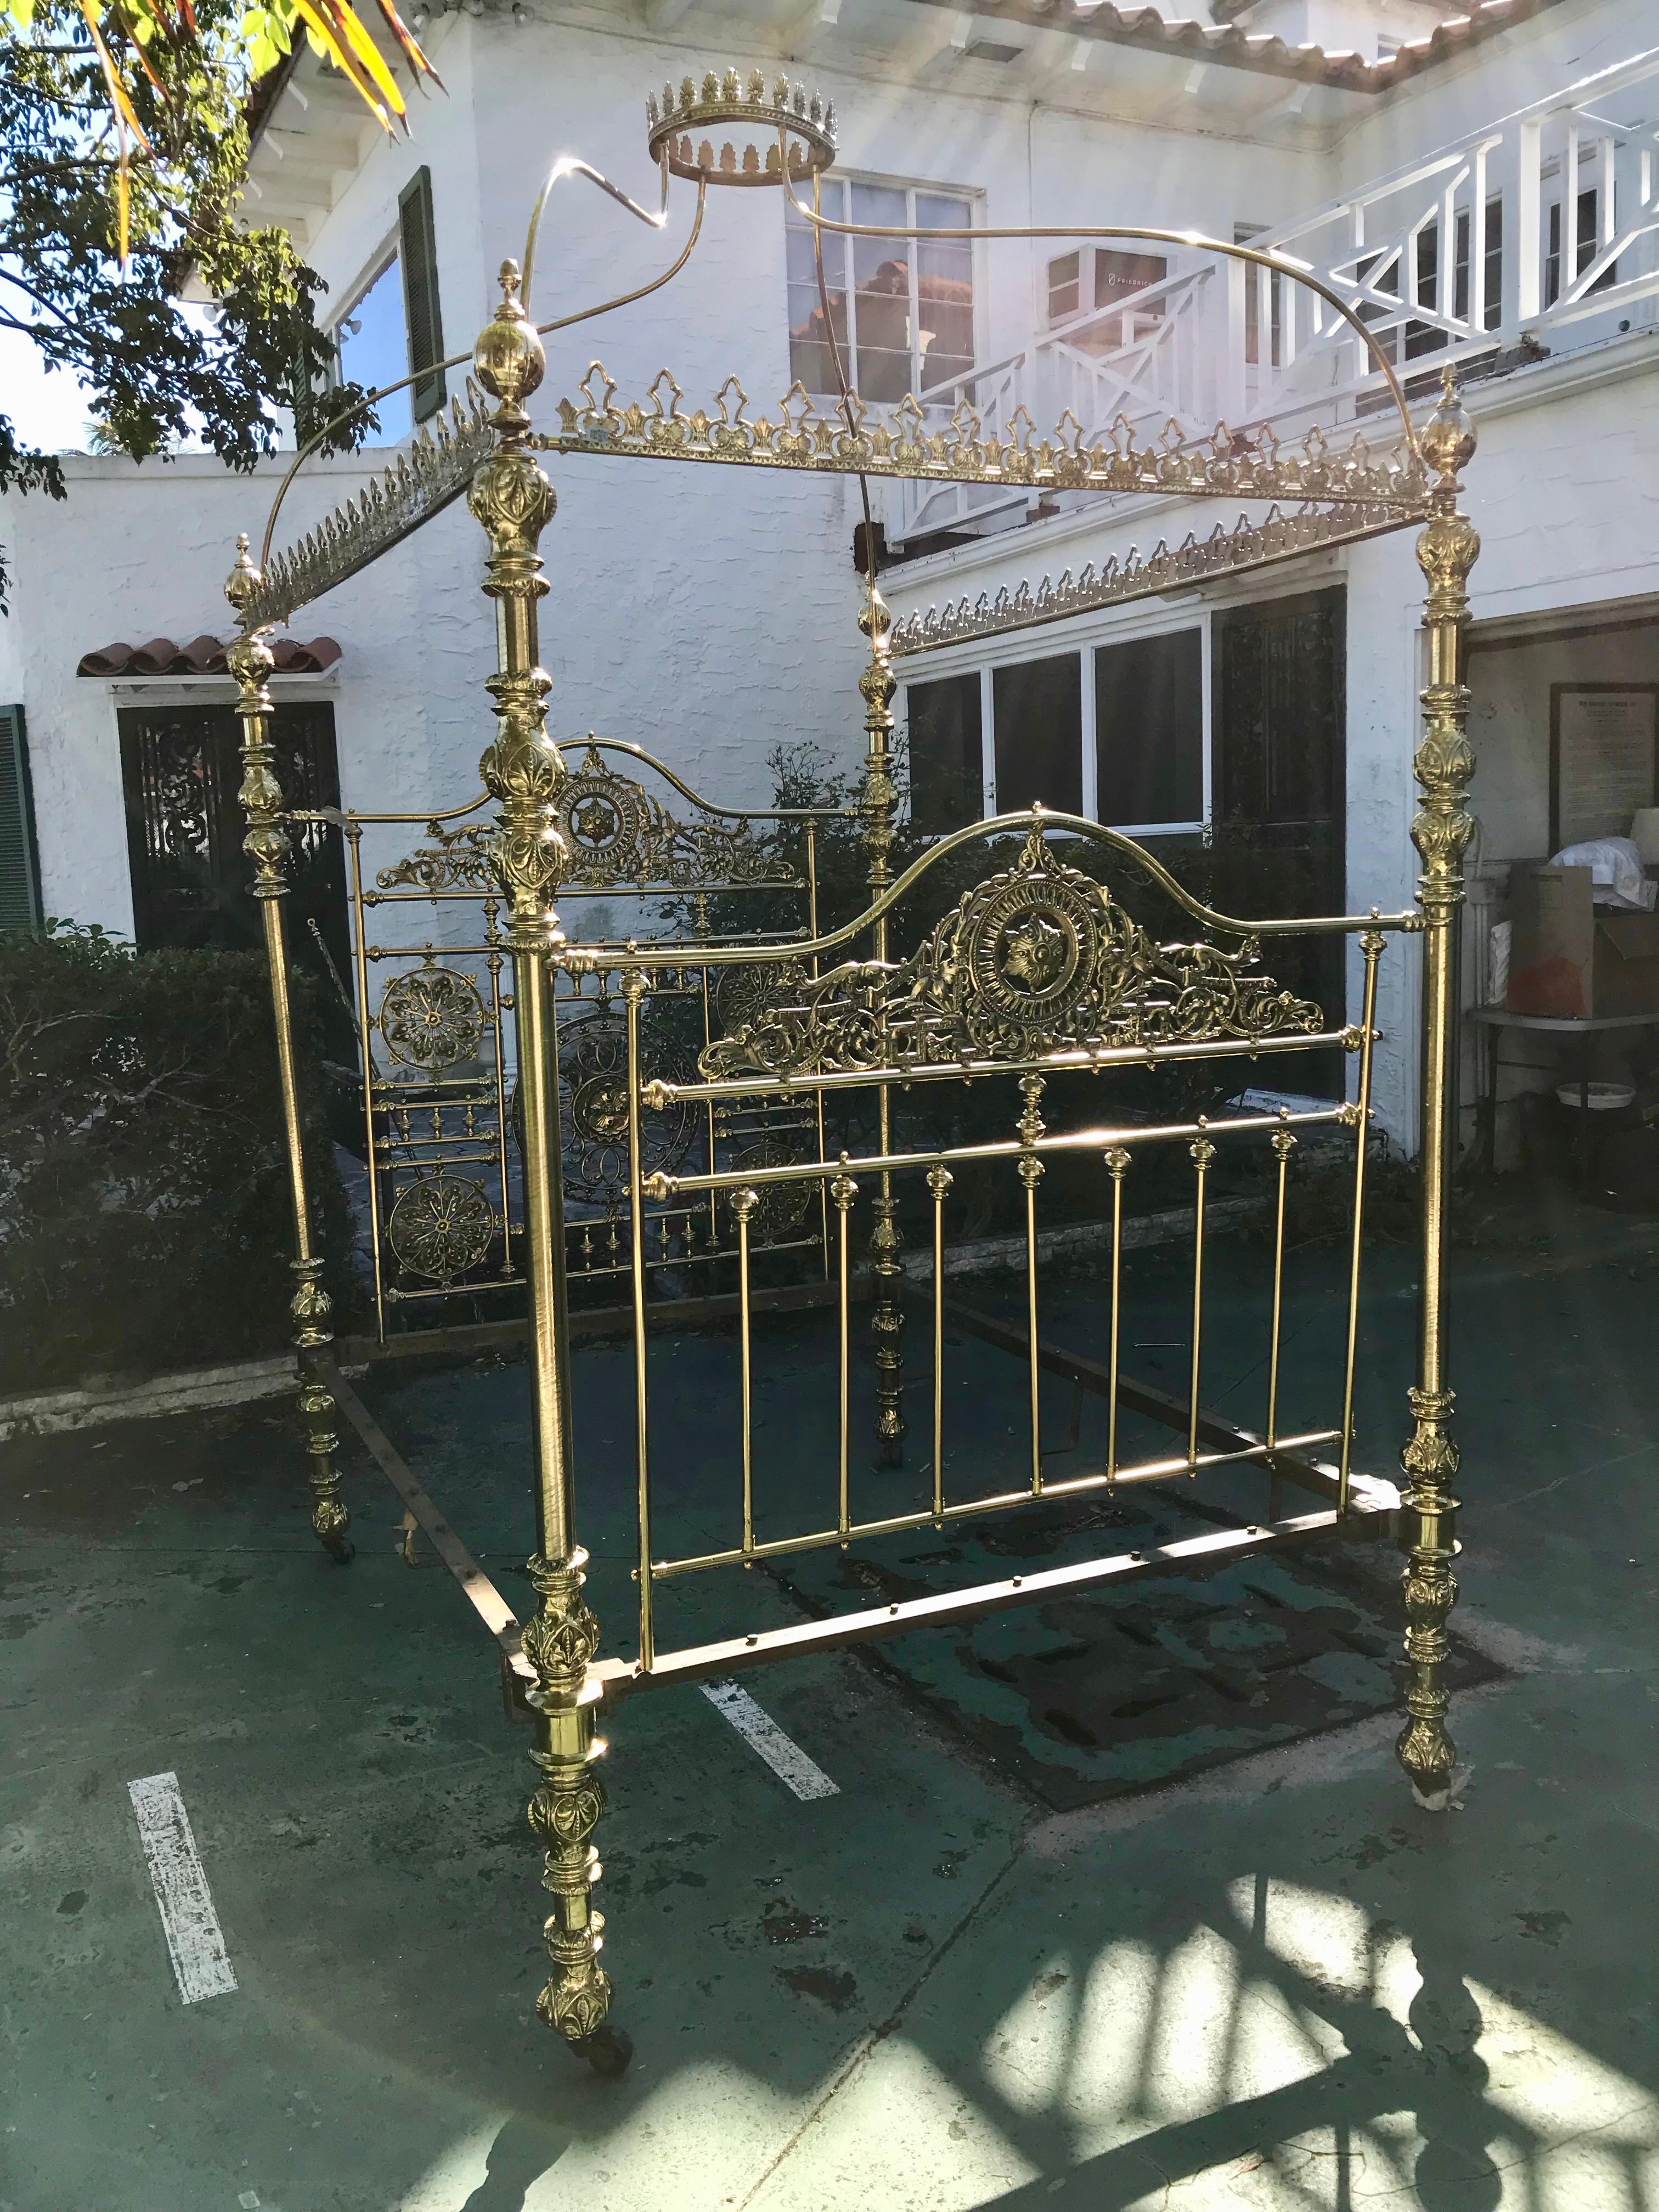 A gift from the King of Morocco decades ago to a lady who later became a Palm Beach resident
(provenance will be provided).
The bed is elaborately cast and appointed with a 